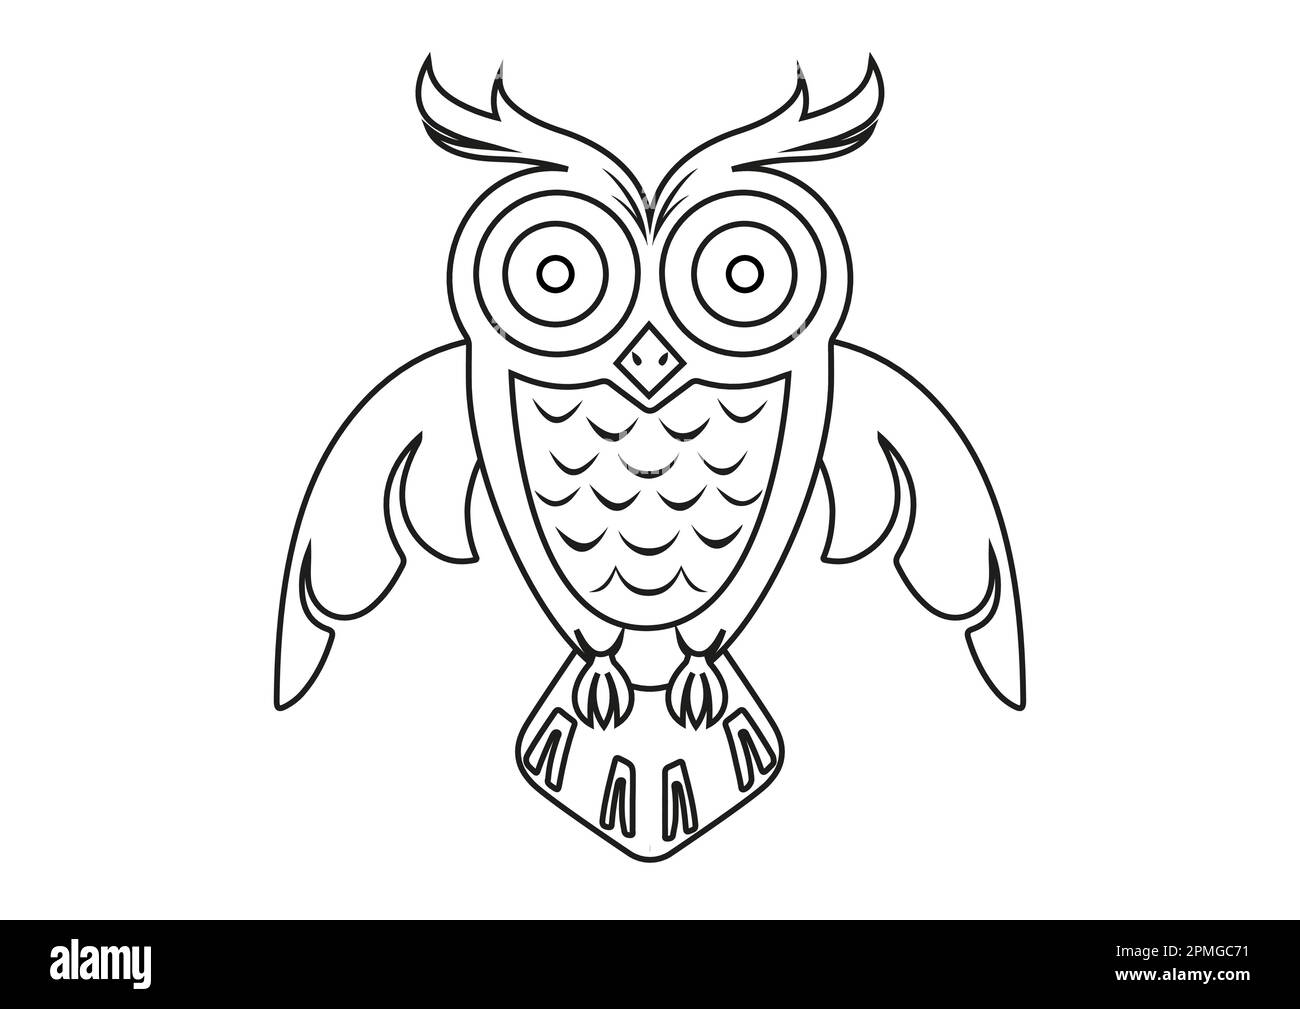 Black and White Owl. Coloring Page Of Cartoon Owl Stock Vector